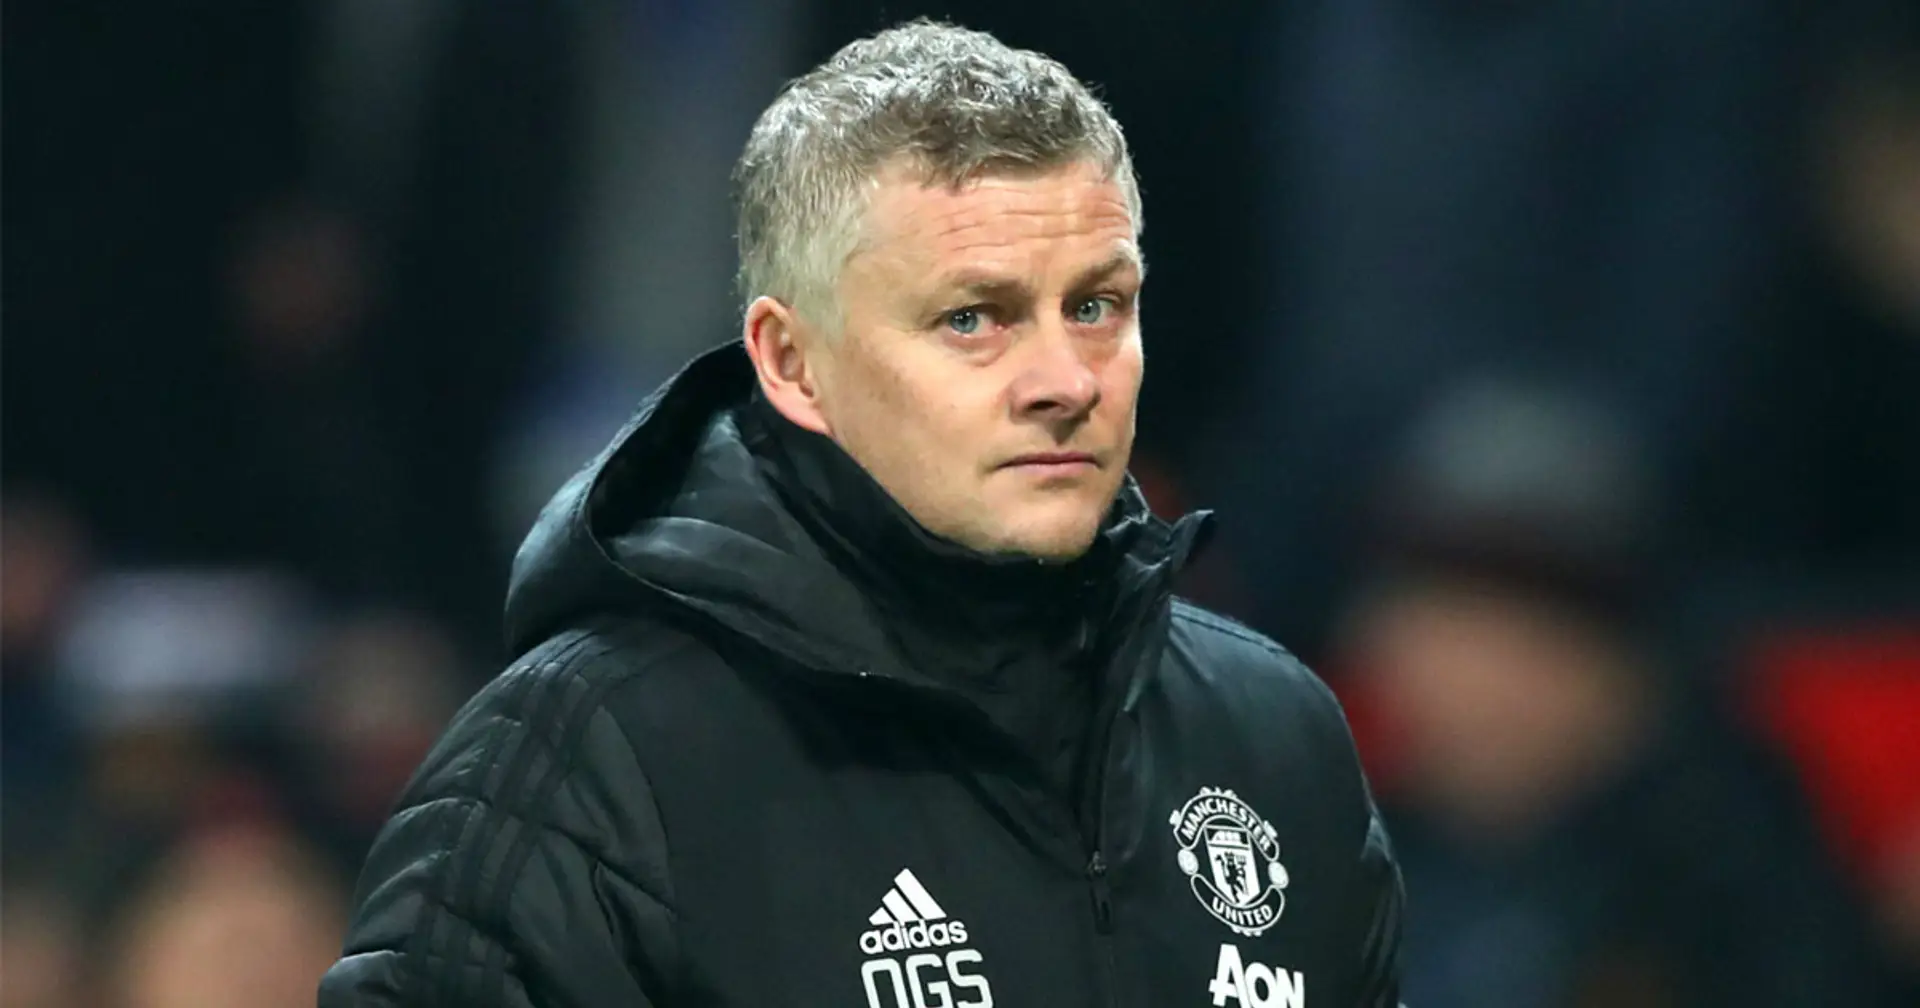 Solskjaer snubbed from Premier League Manager of the Season shortlist as Frank Lampard and Brendan Rodgers receive nominations